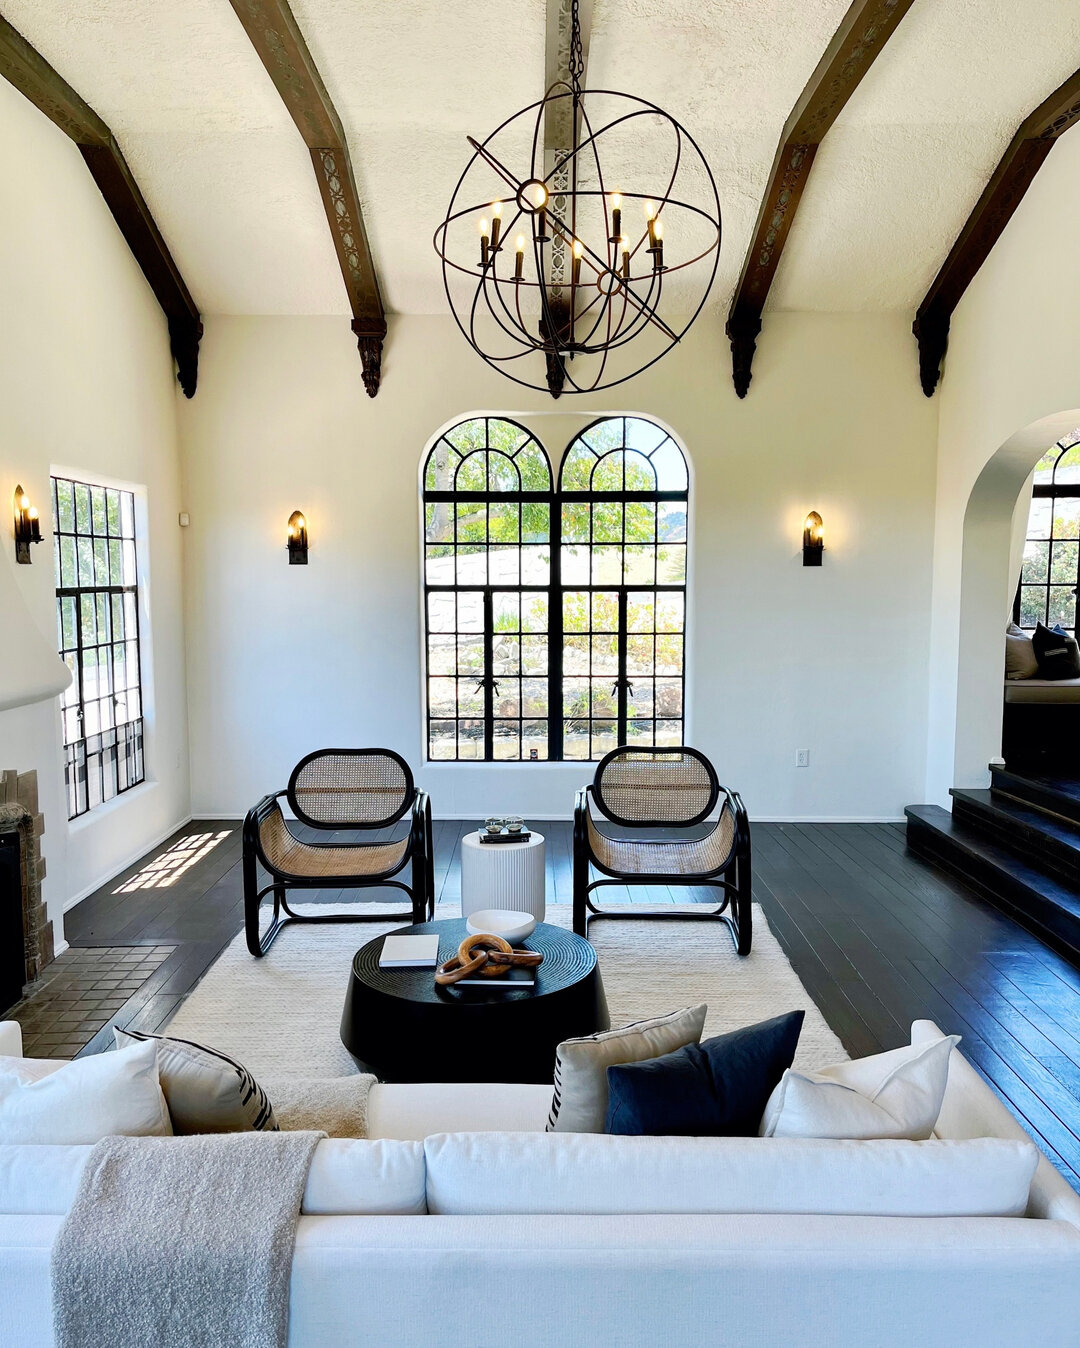 At 5600 square feet, this 1929 Spanish style estate might be the largest property we&rsquo;ve staged. With lots of original details and charm, it was a real stunner!​​​​​​​​
.​​​​​​​​
.​​​​​​​​
.​​​​​​​​
.​​​​​​​​
#interiordesign #interioraesthetics 